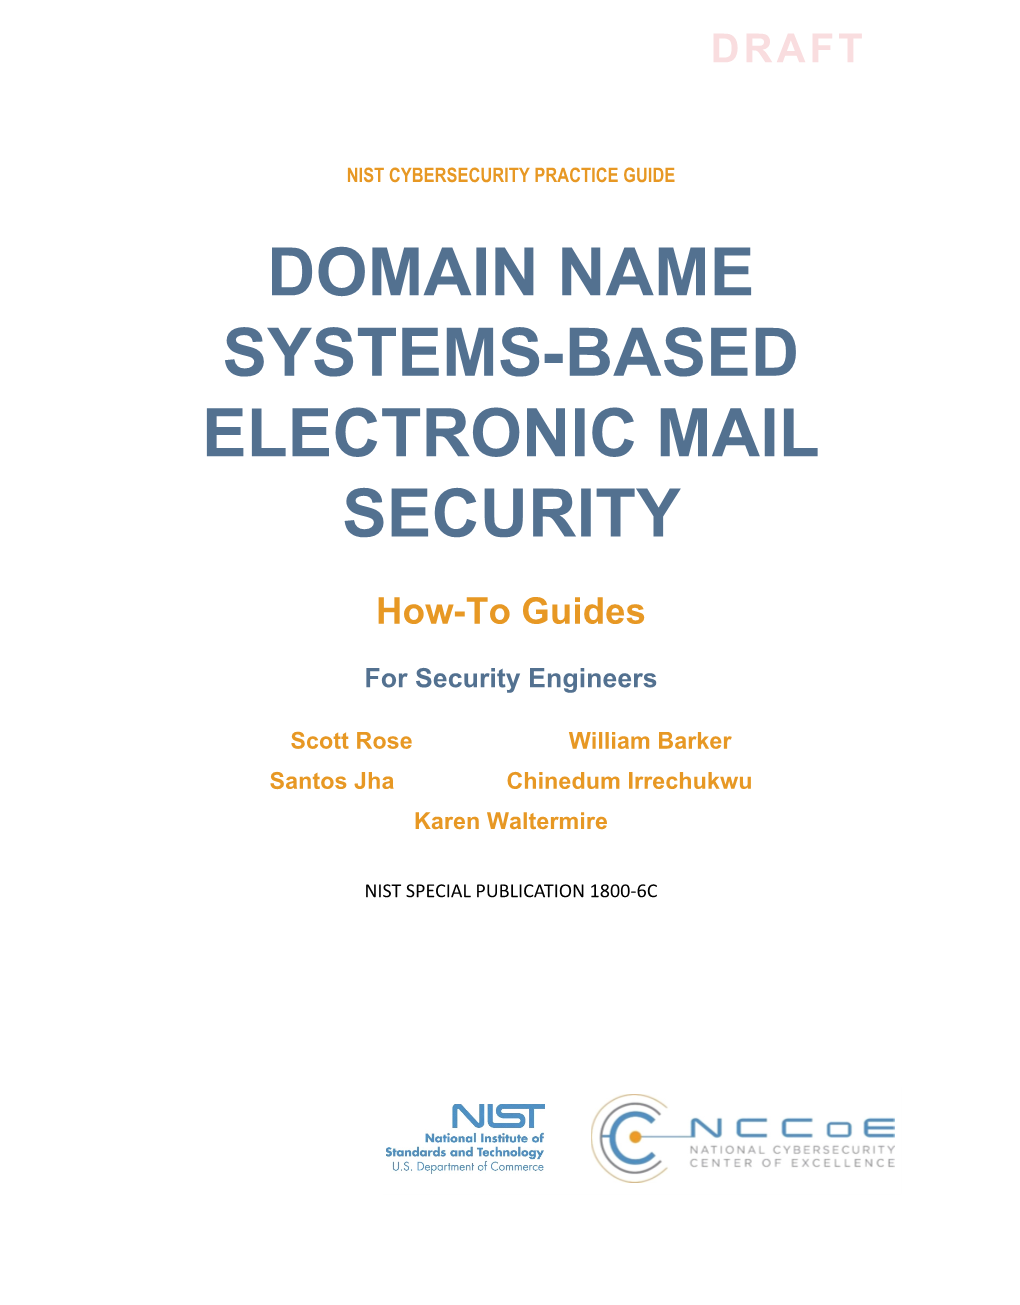 Domain Name Systems-Based Electronic Mail Security